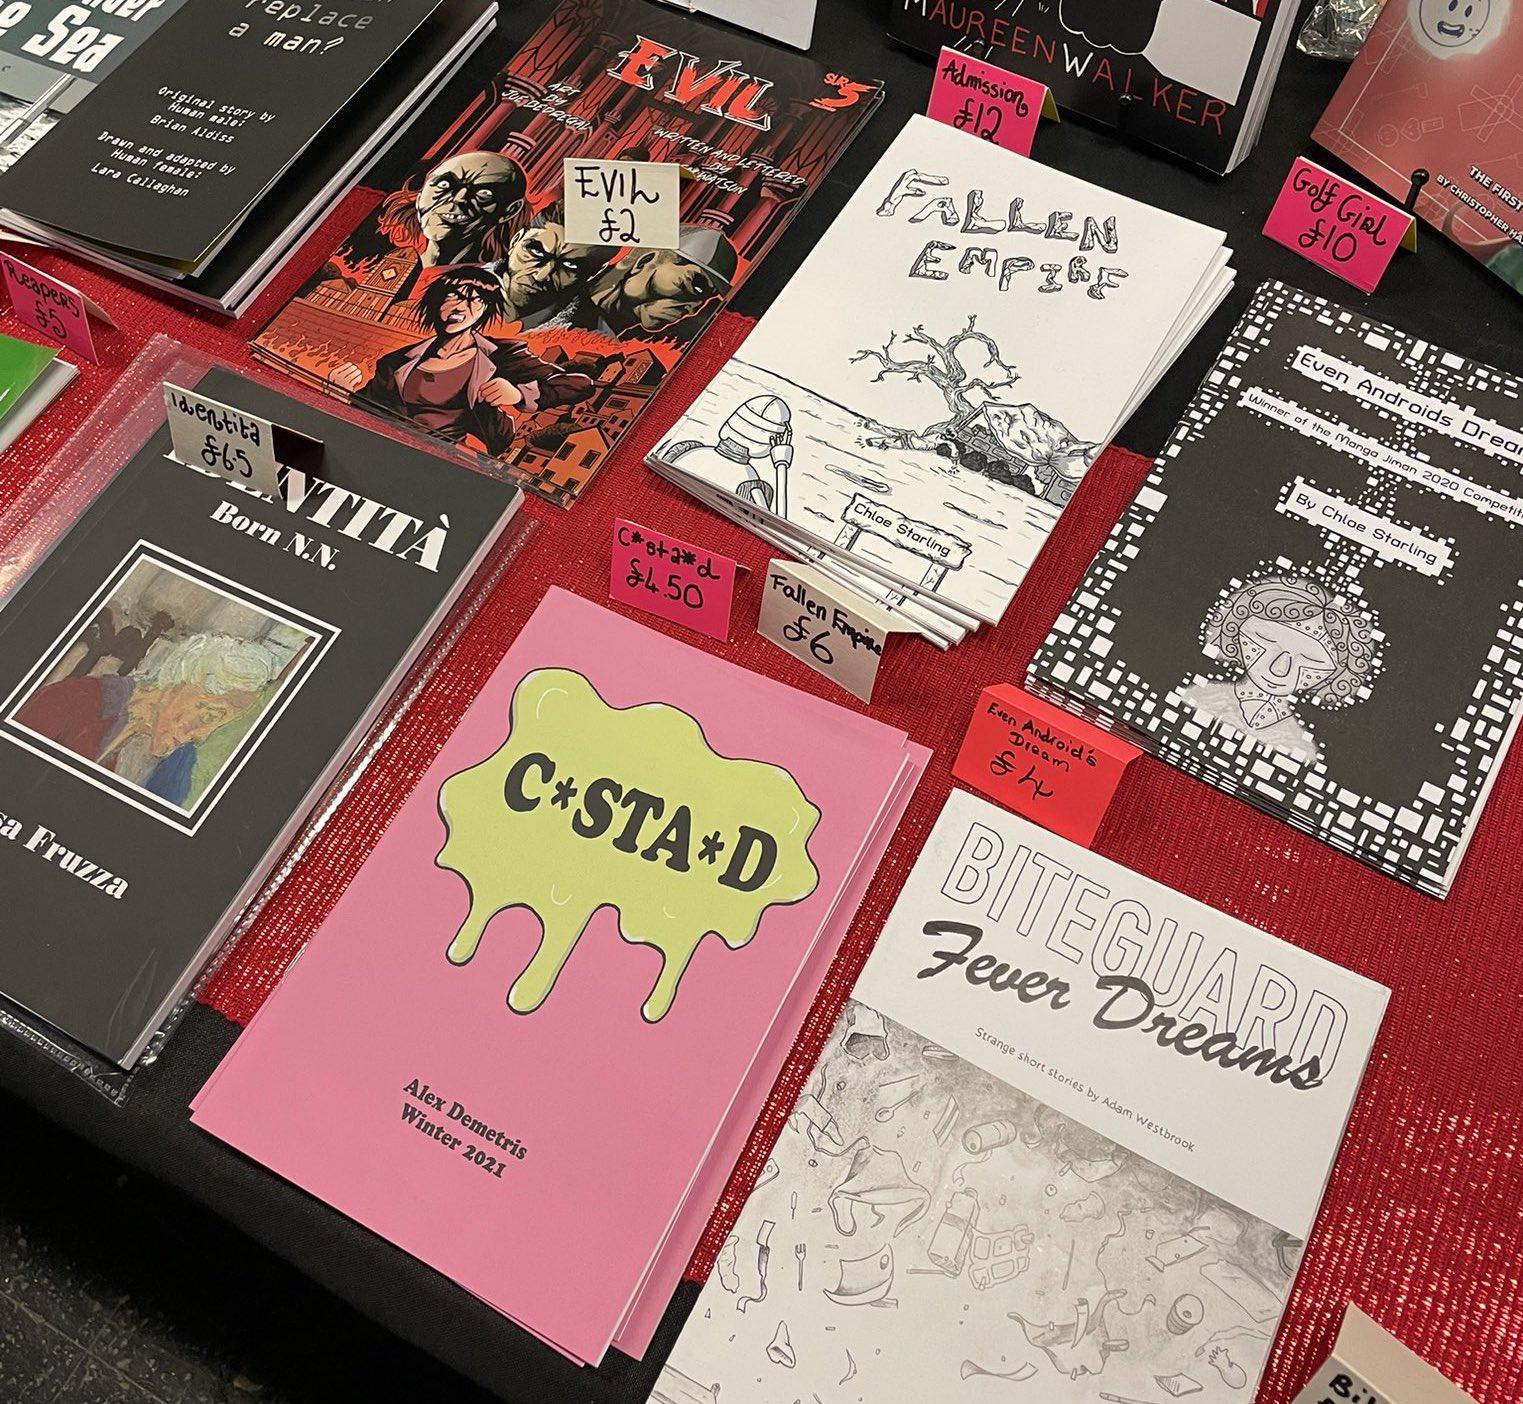 Bite Guard Fever Dreams on sale at Thought Bubble 2022